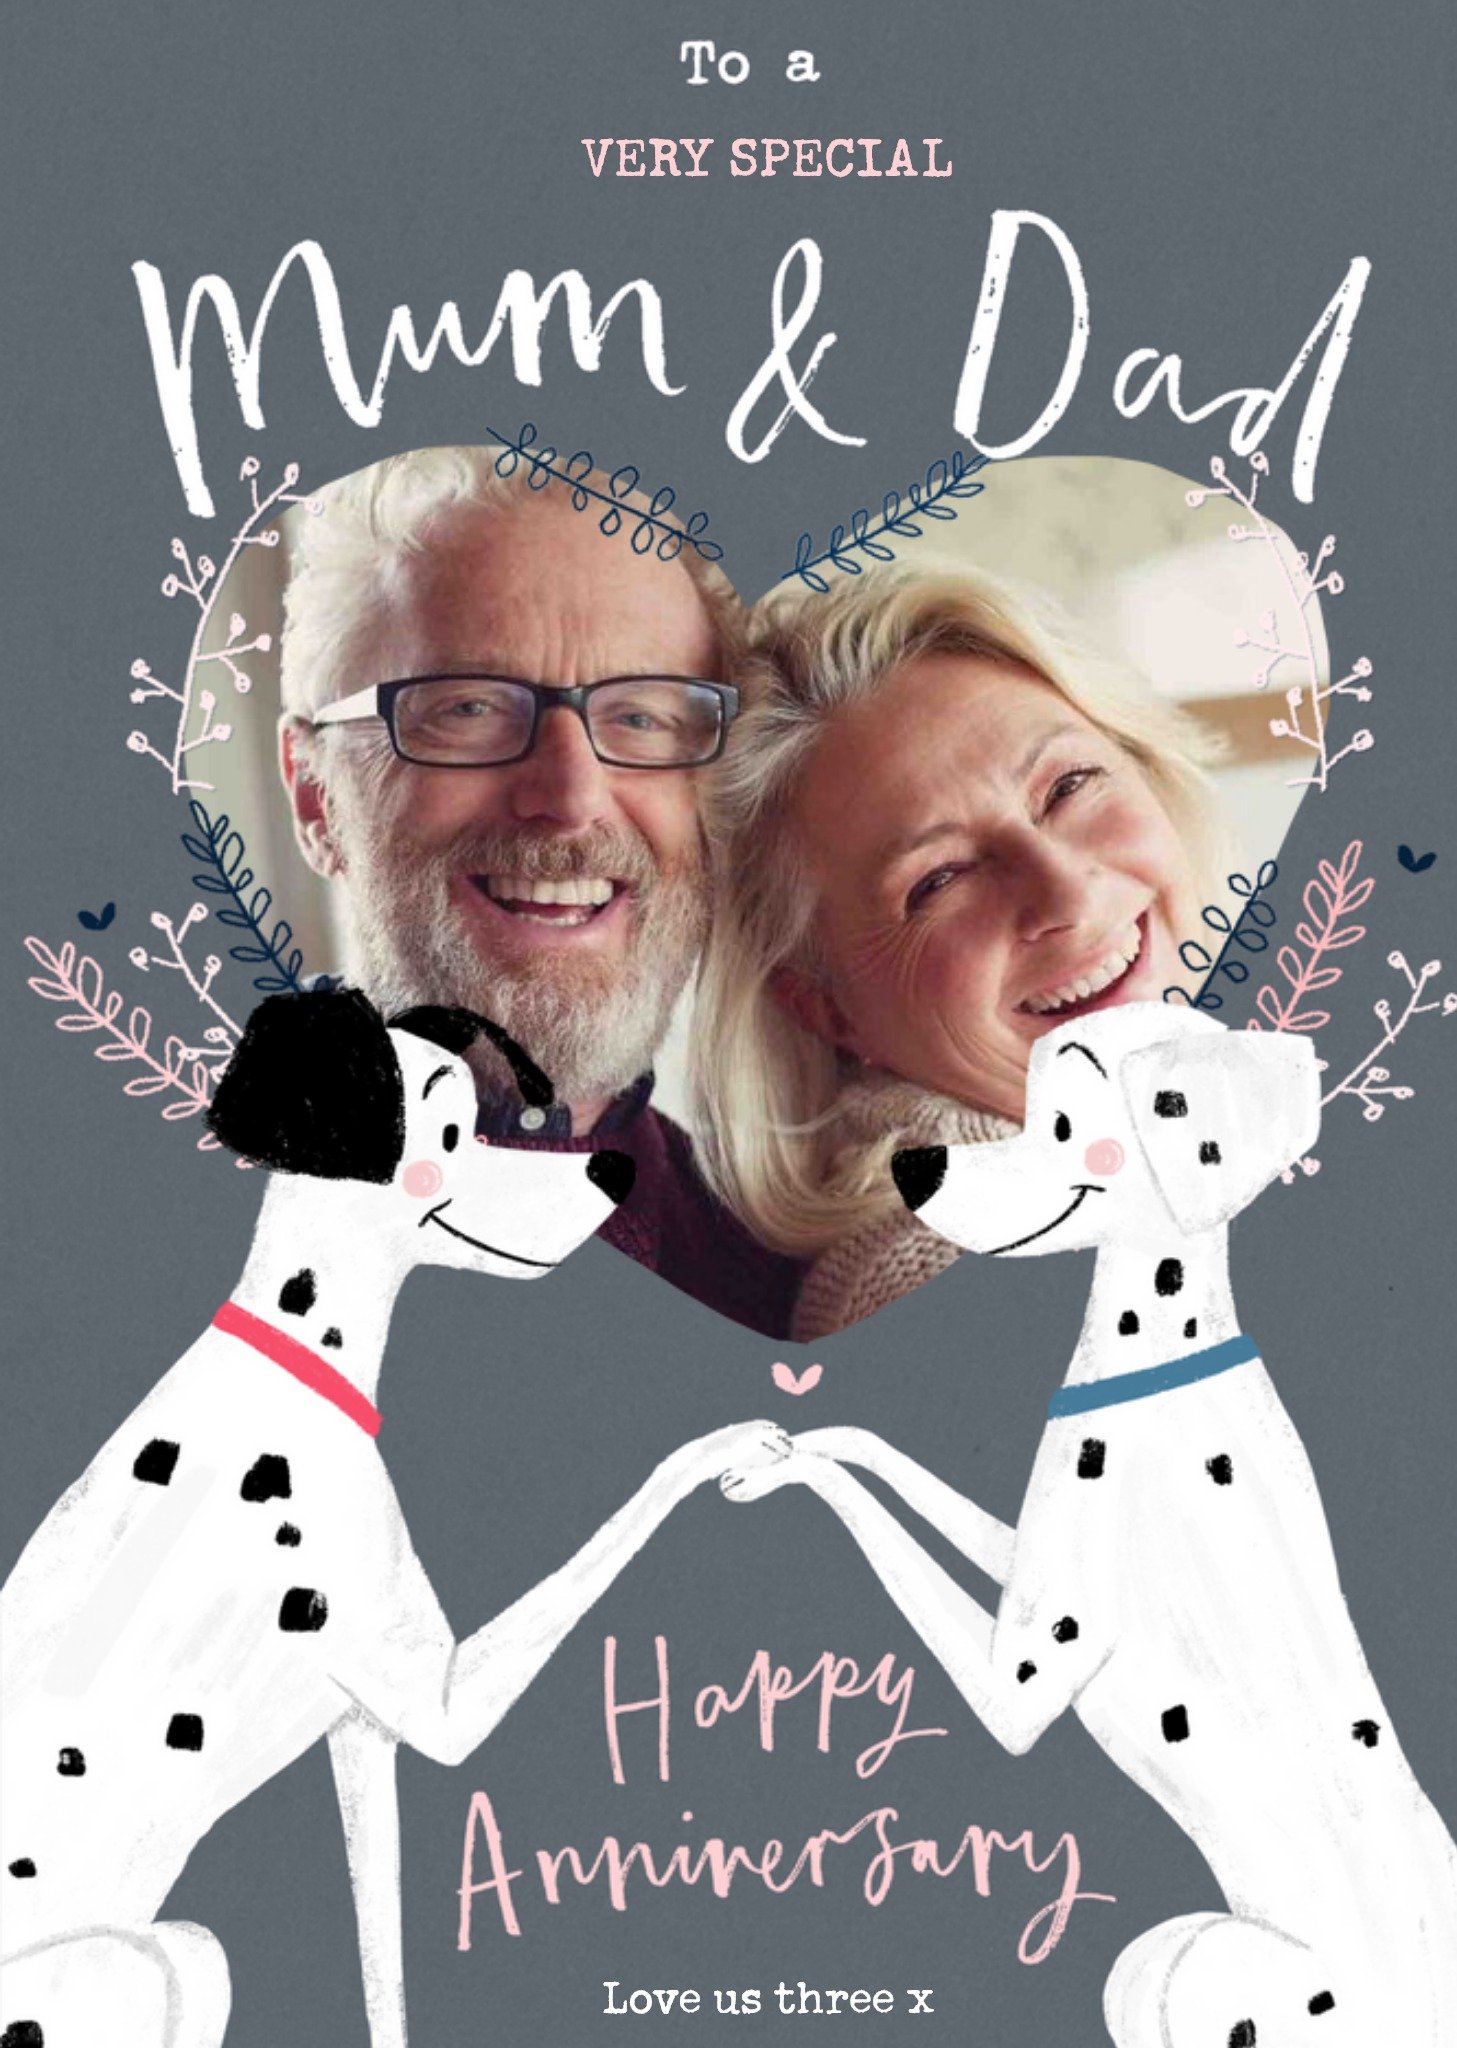 Disney 101 Dalmatians Photo Upload Anniversary Card For Mum And Dad, Large